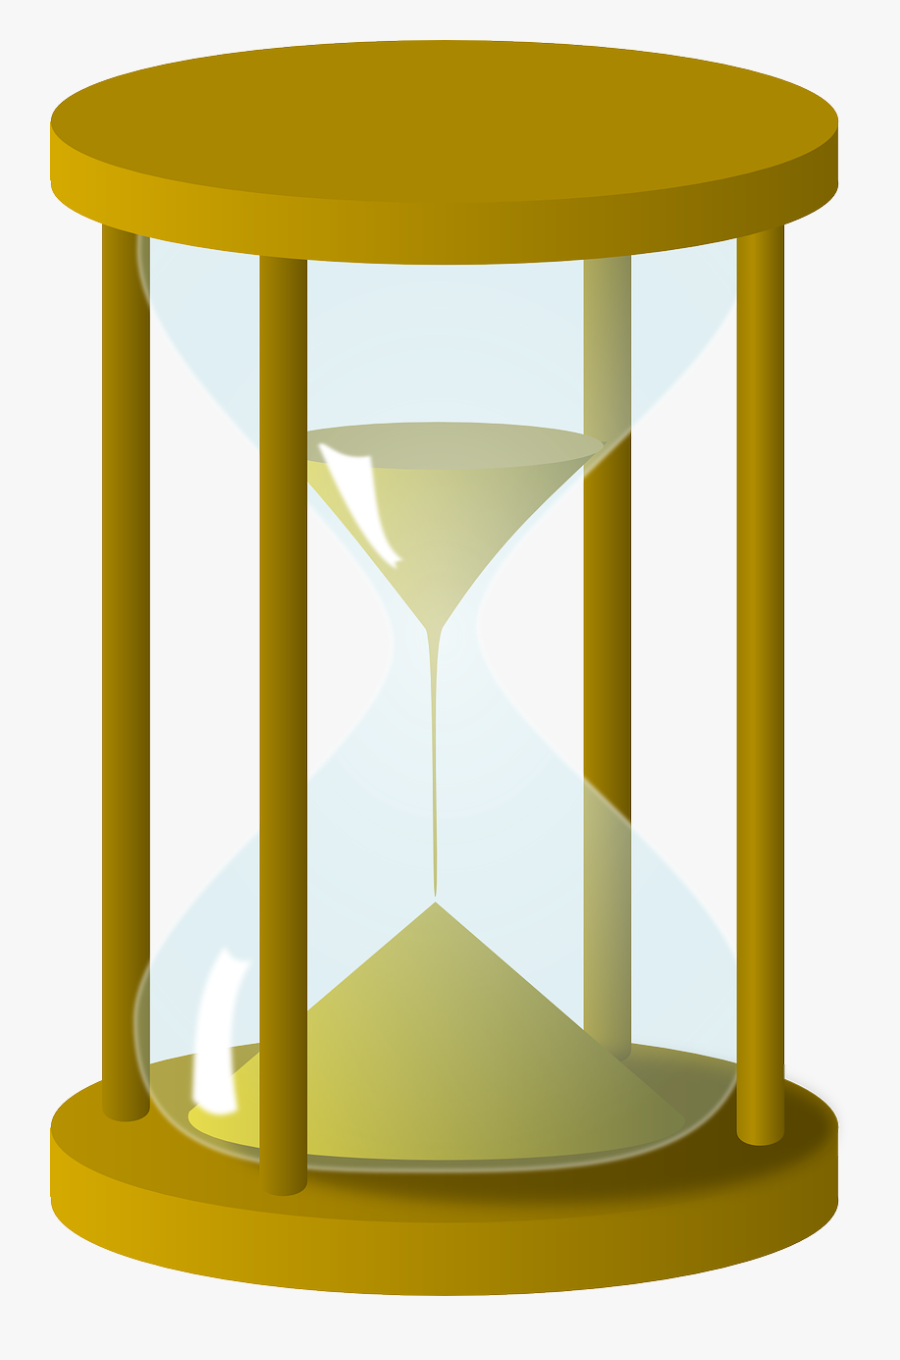 Clipart Hourglass Gif Animation - Png Hourglass Animated Gif, Transparent Clipart